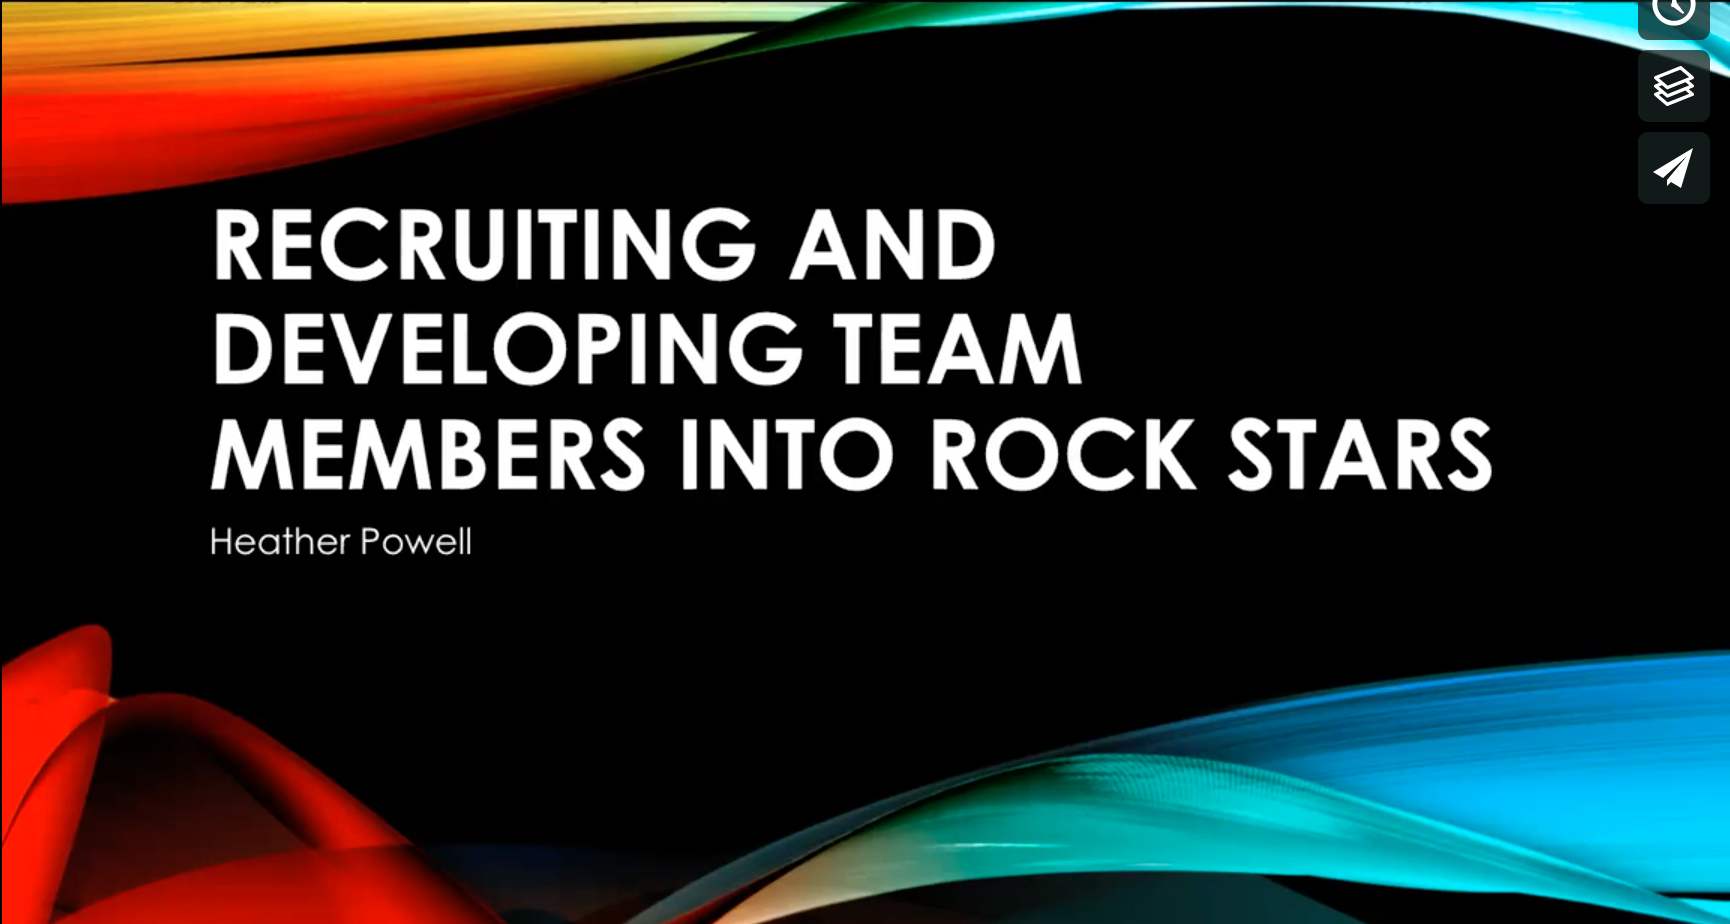 Developing Team Members into Rock Stars with Heather Powell